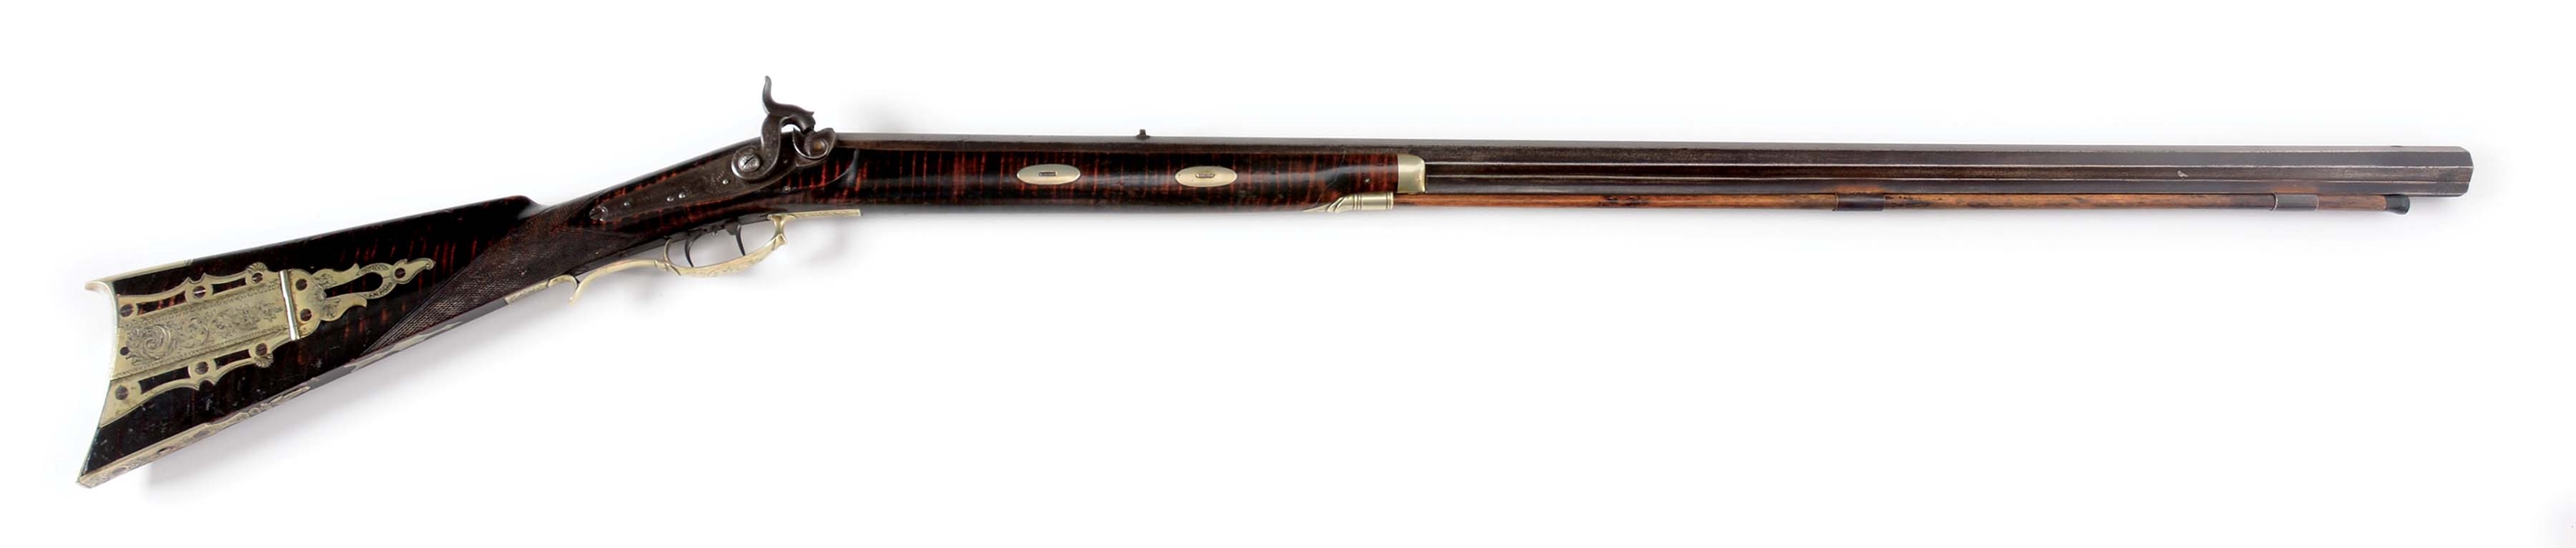 (A) TRYON HALF STOCK PERCUSSION RIFLE.